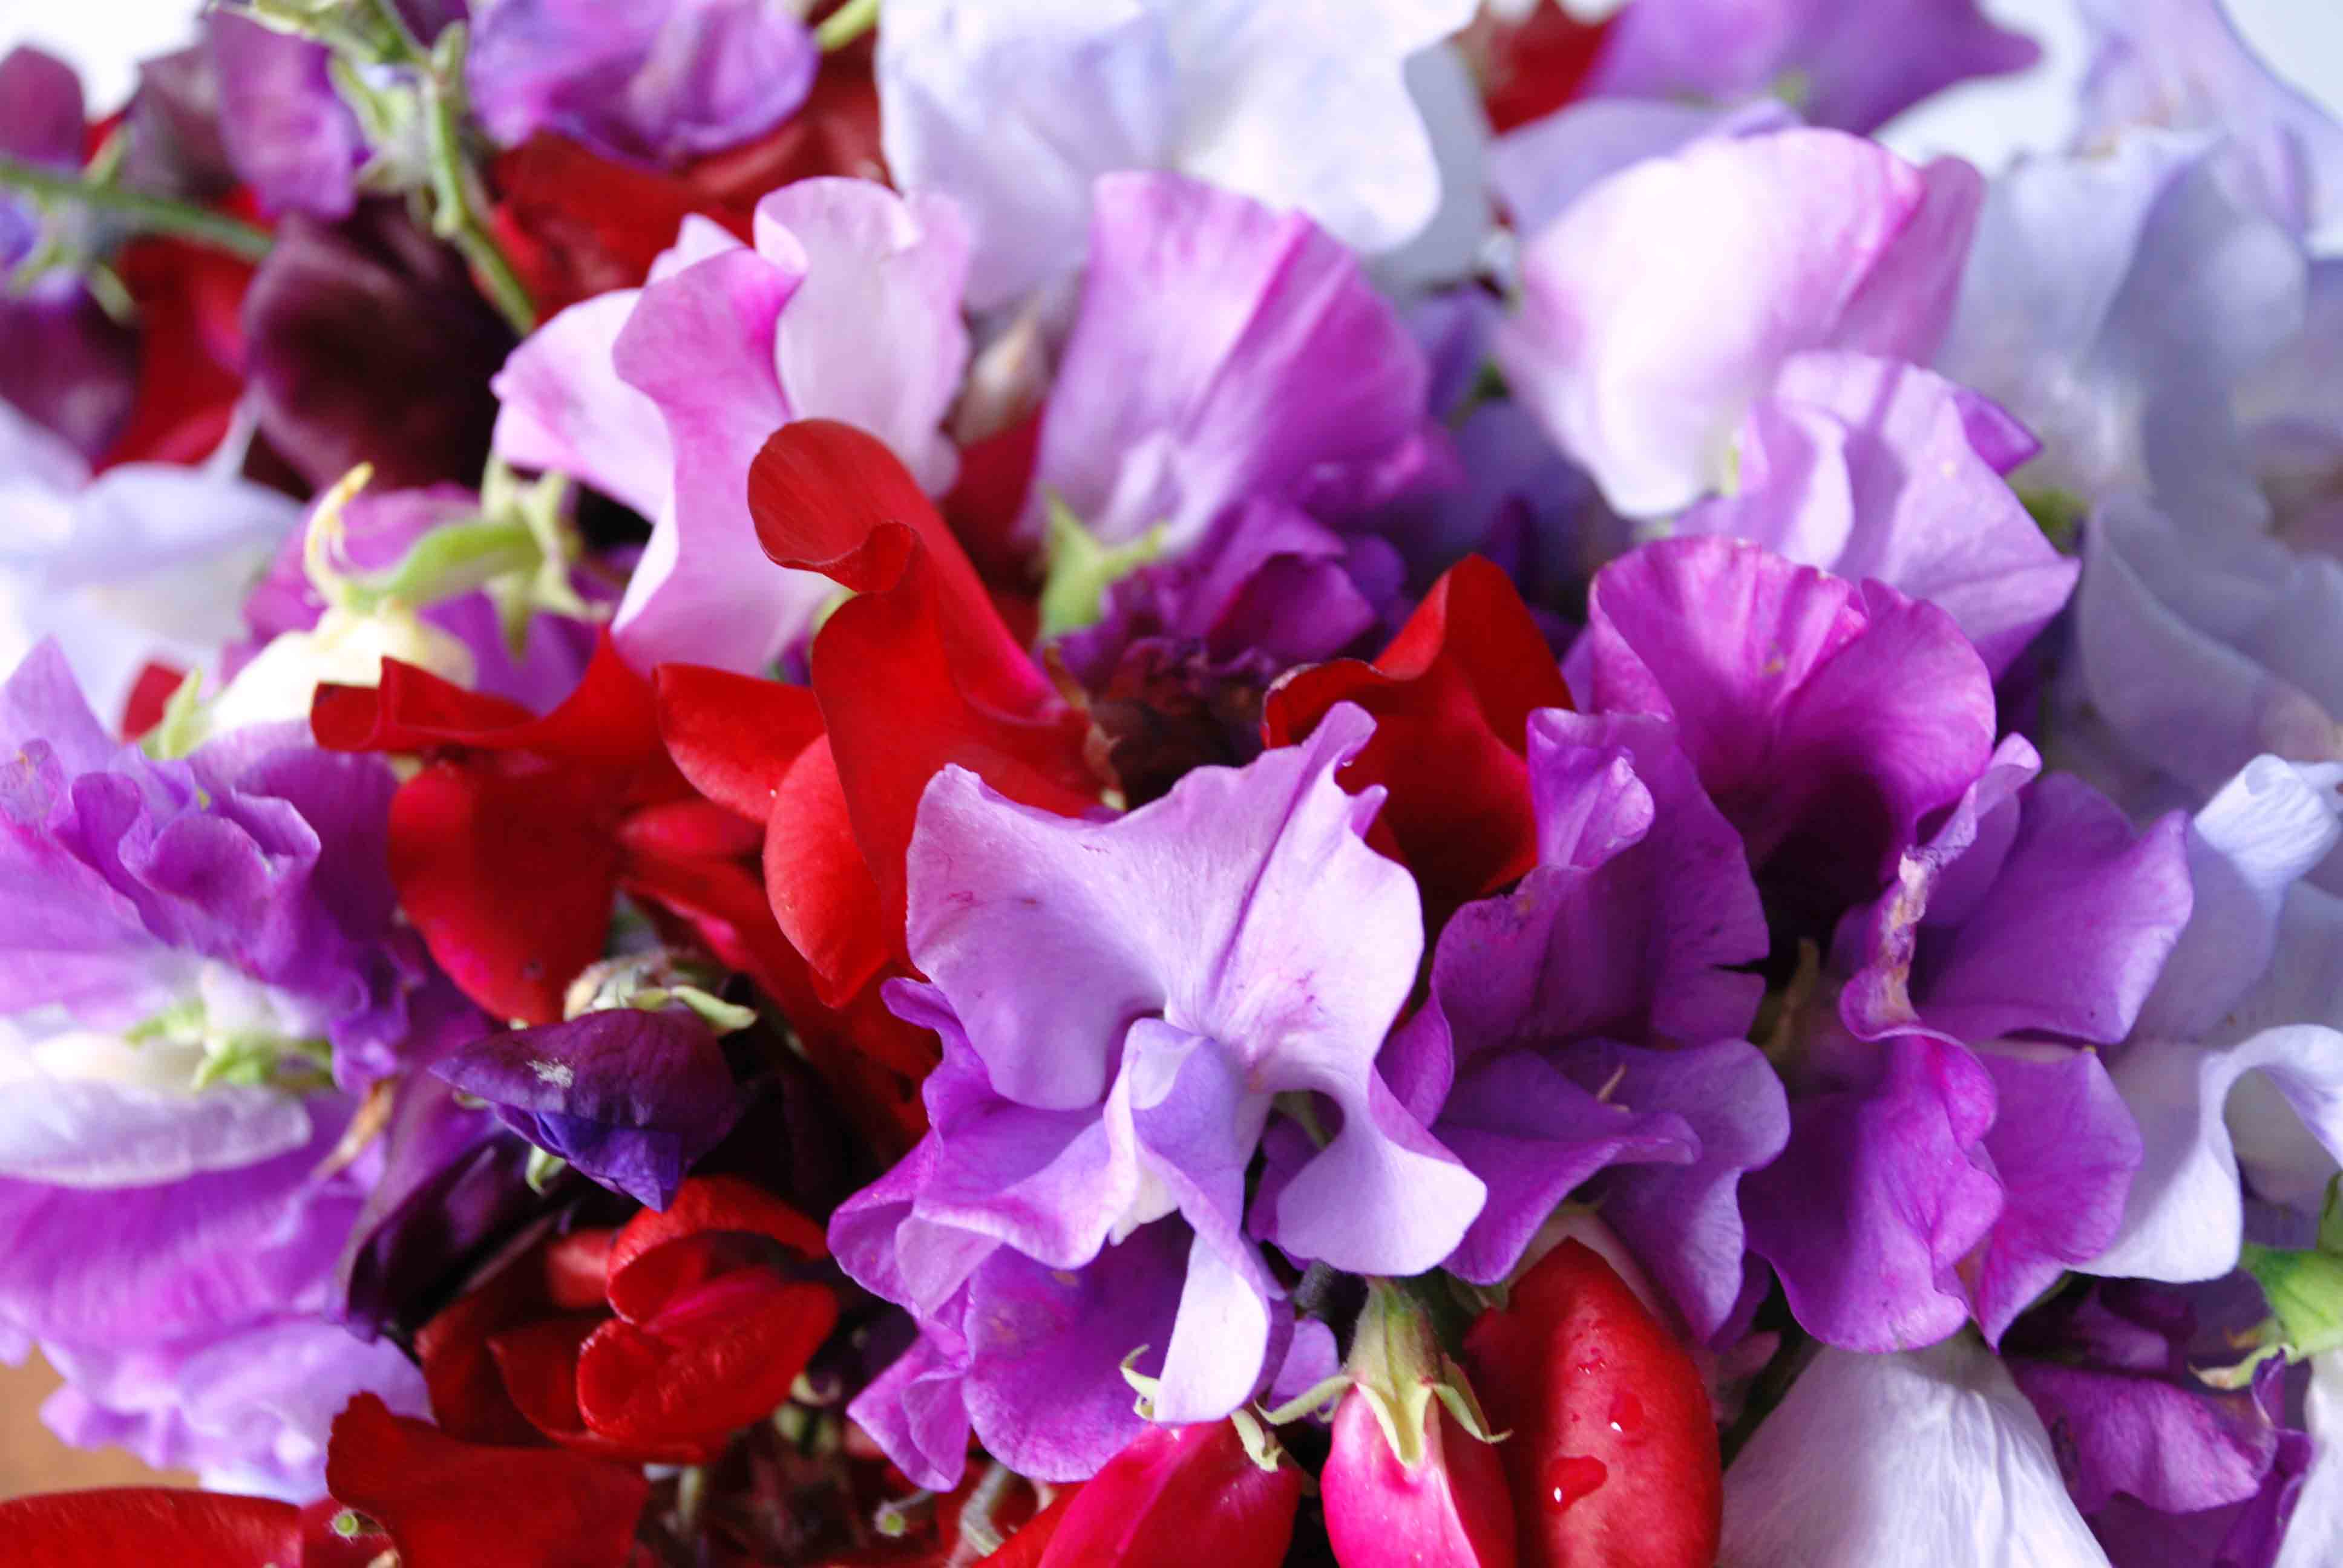 Sweet pea Latest HD Wallpapers Free Download | New HD Wallpapers ...